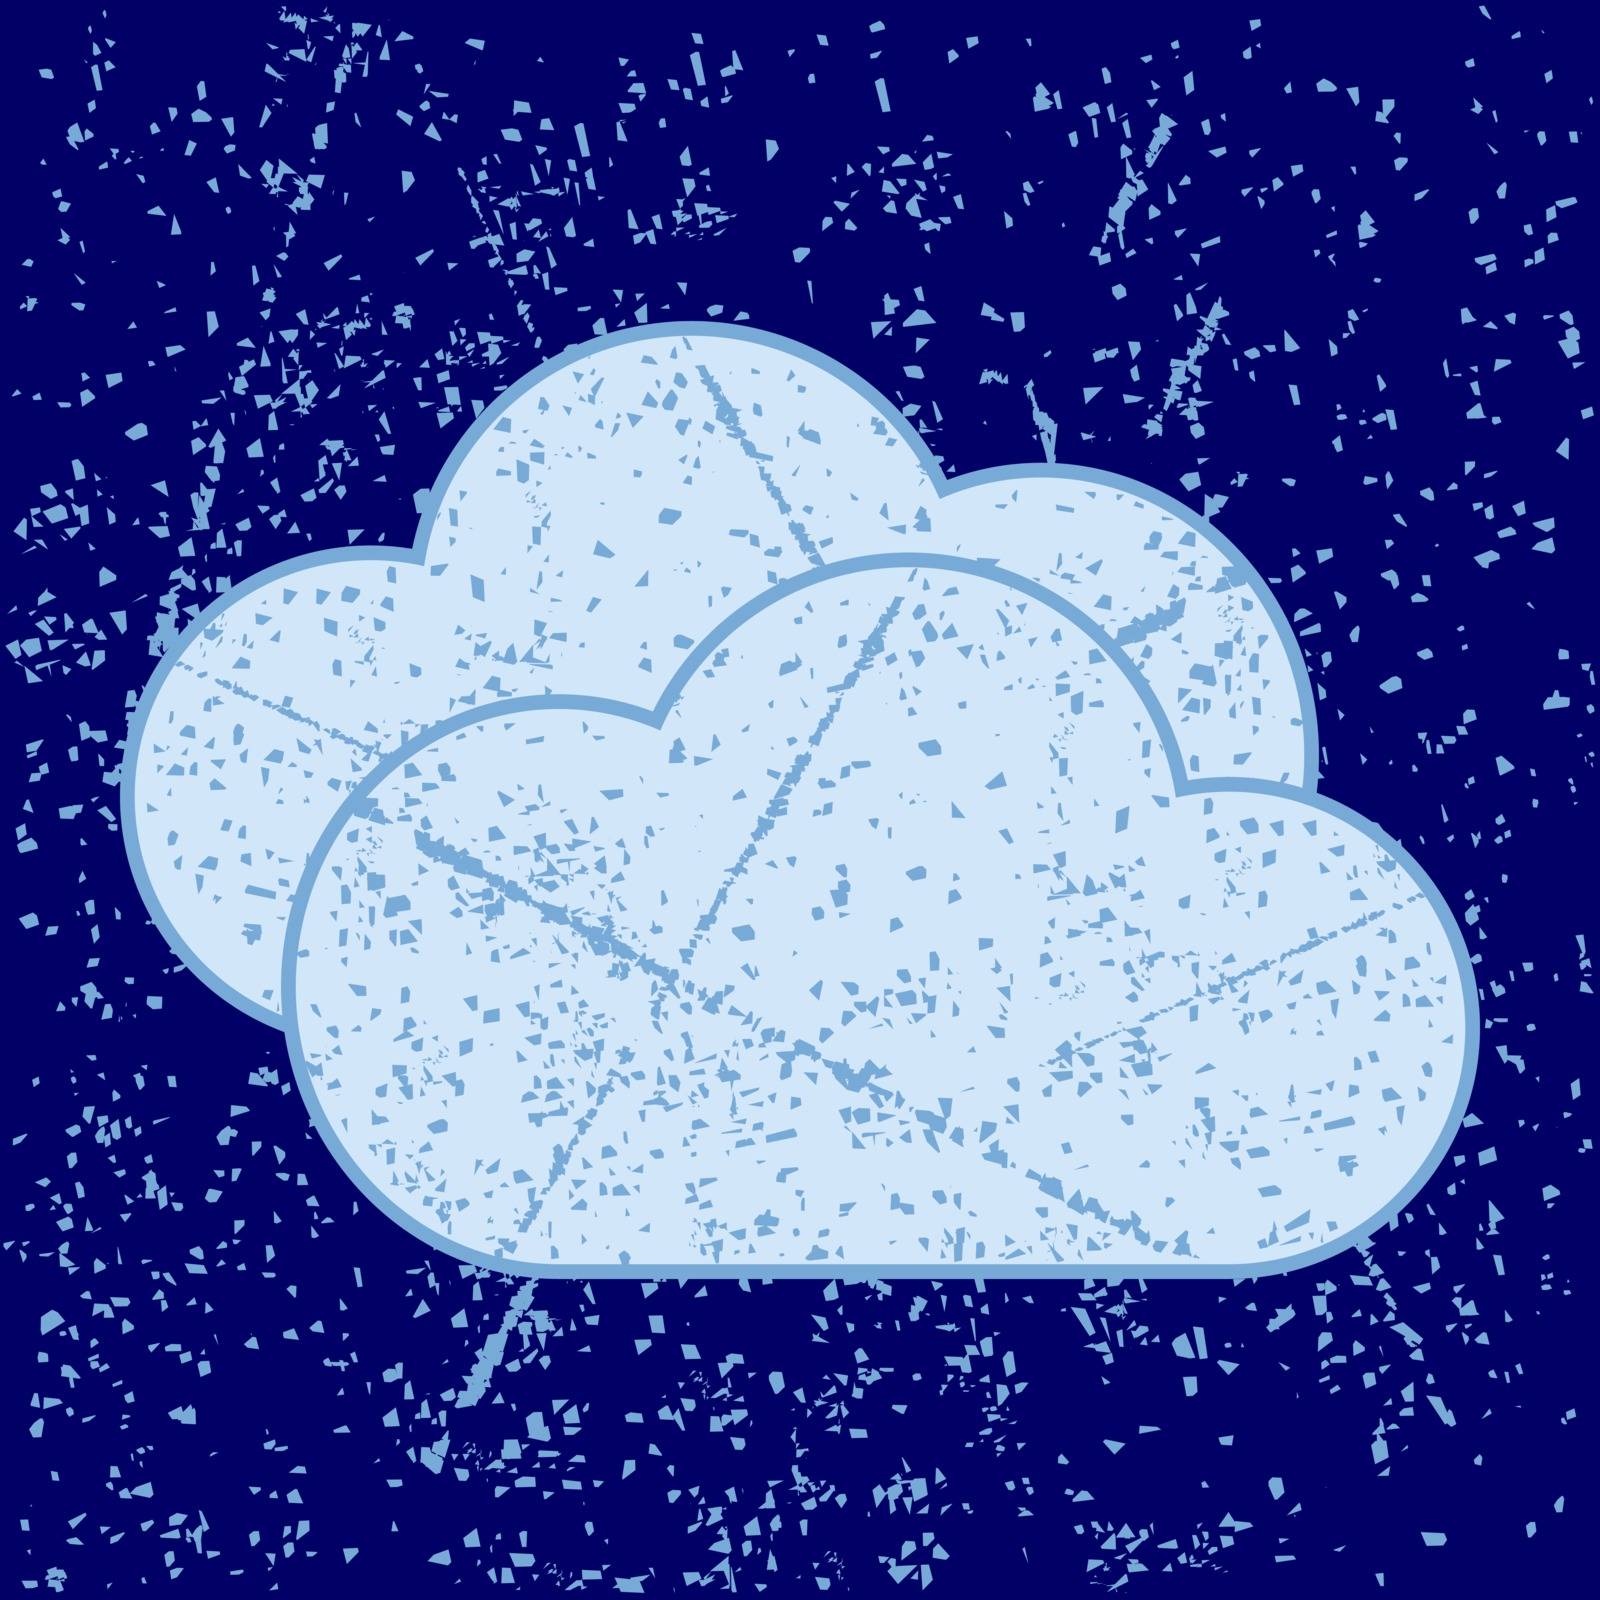 cloud image with grunge pattern on blue background